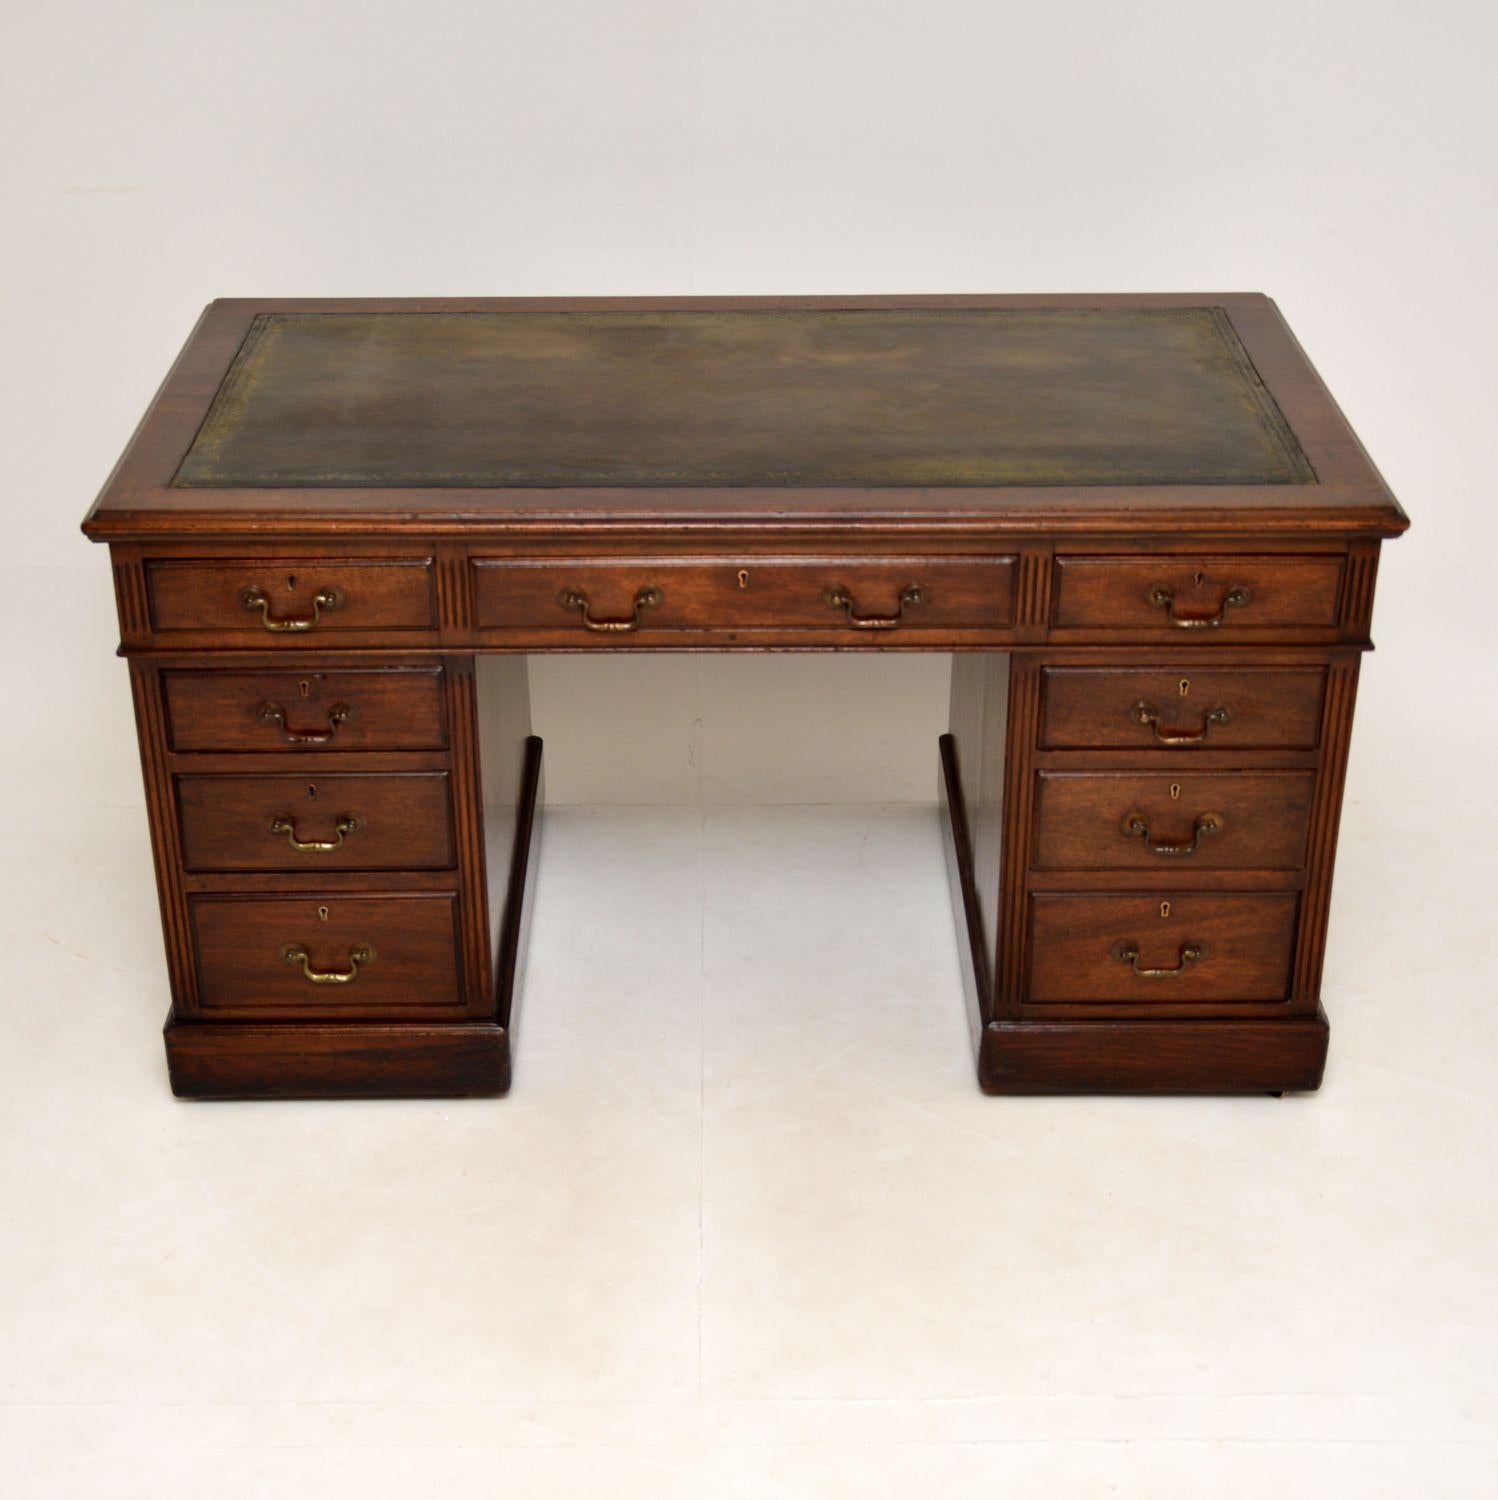 A large antique Victorian pedestal desk in mahogany, this dates from around the 1880-1890 period.

It is of excellent quality, with reeded edges and lovely original brass handles. This sits on a plinth base, and is nicely polished on the back, so